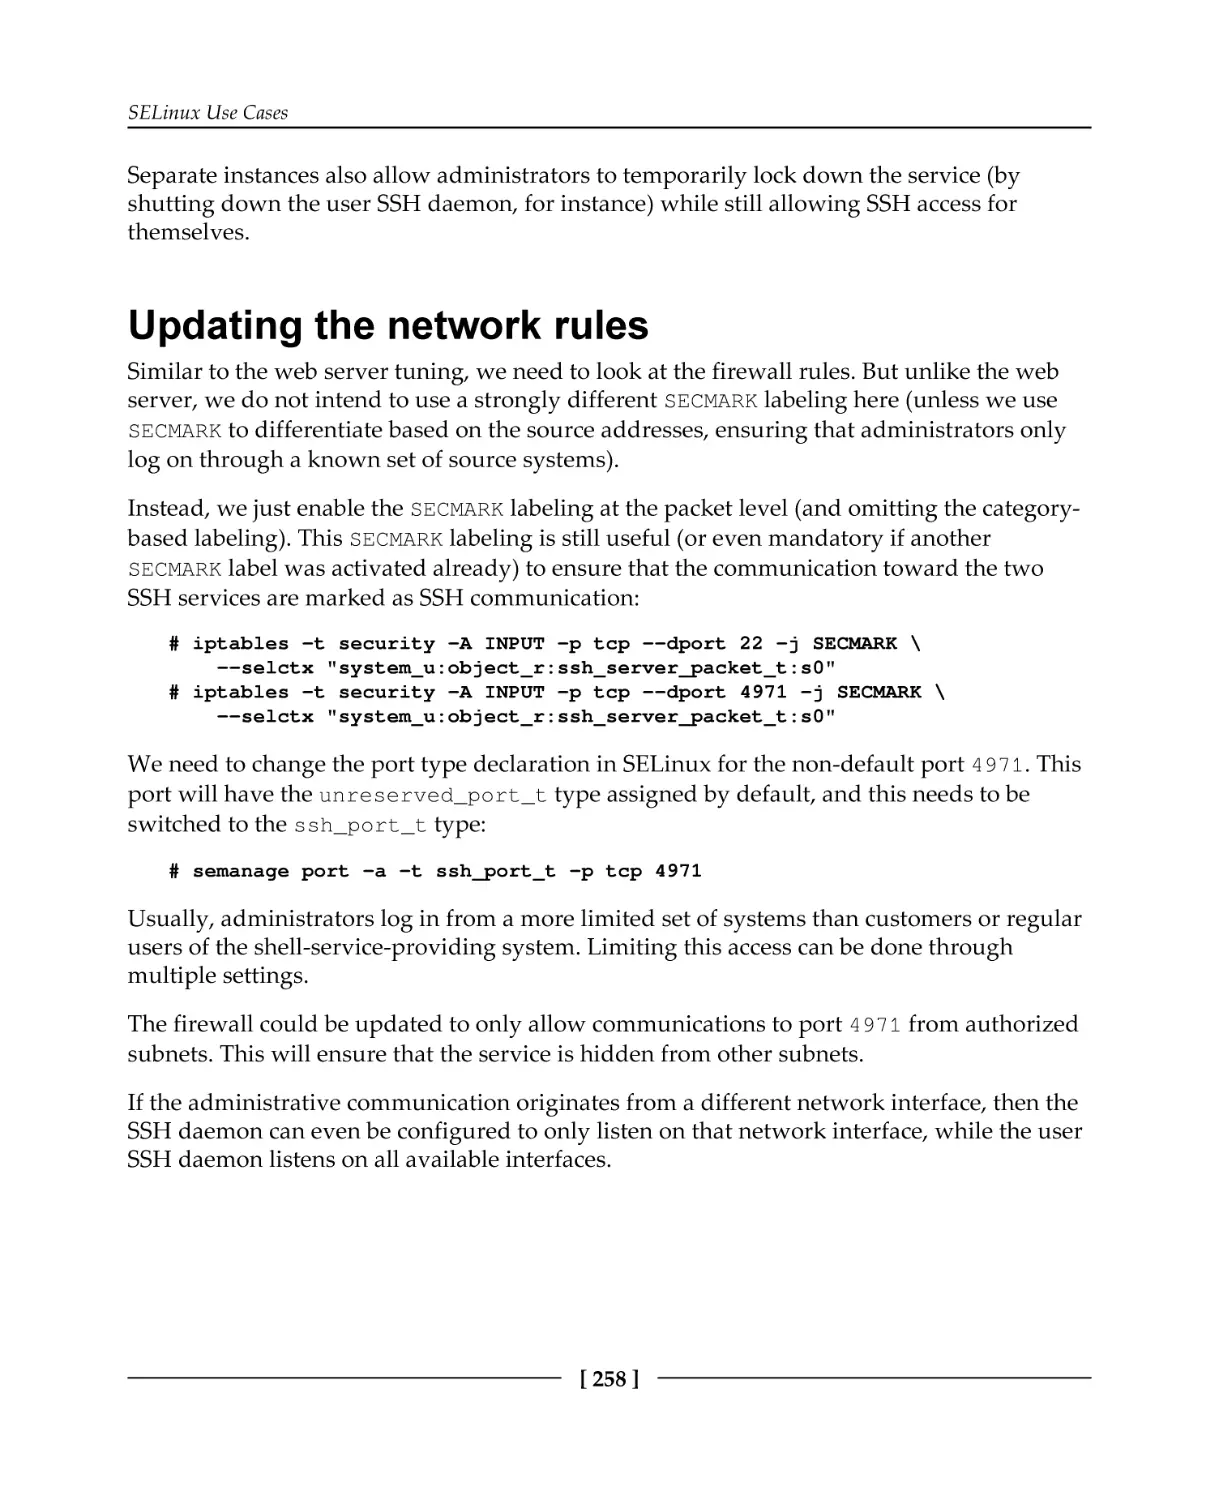 Updating the network rules